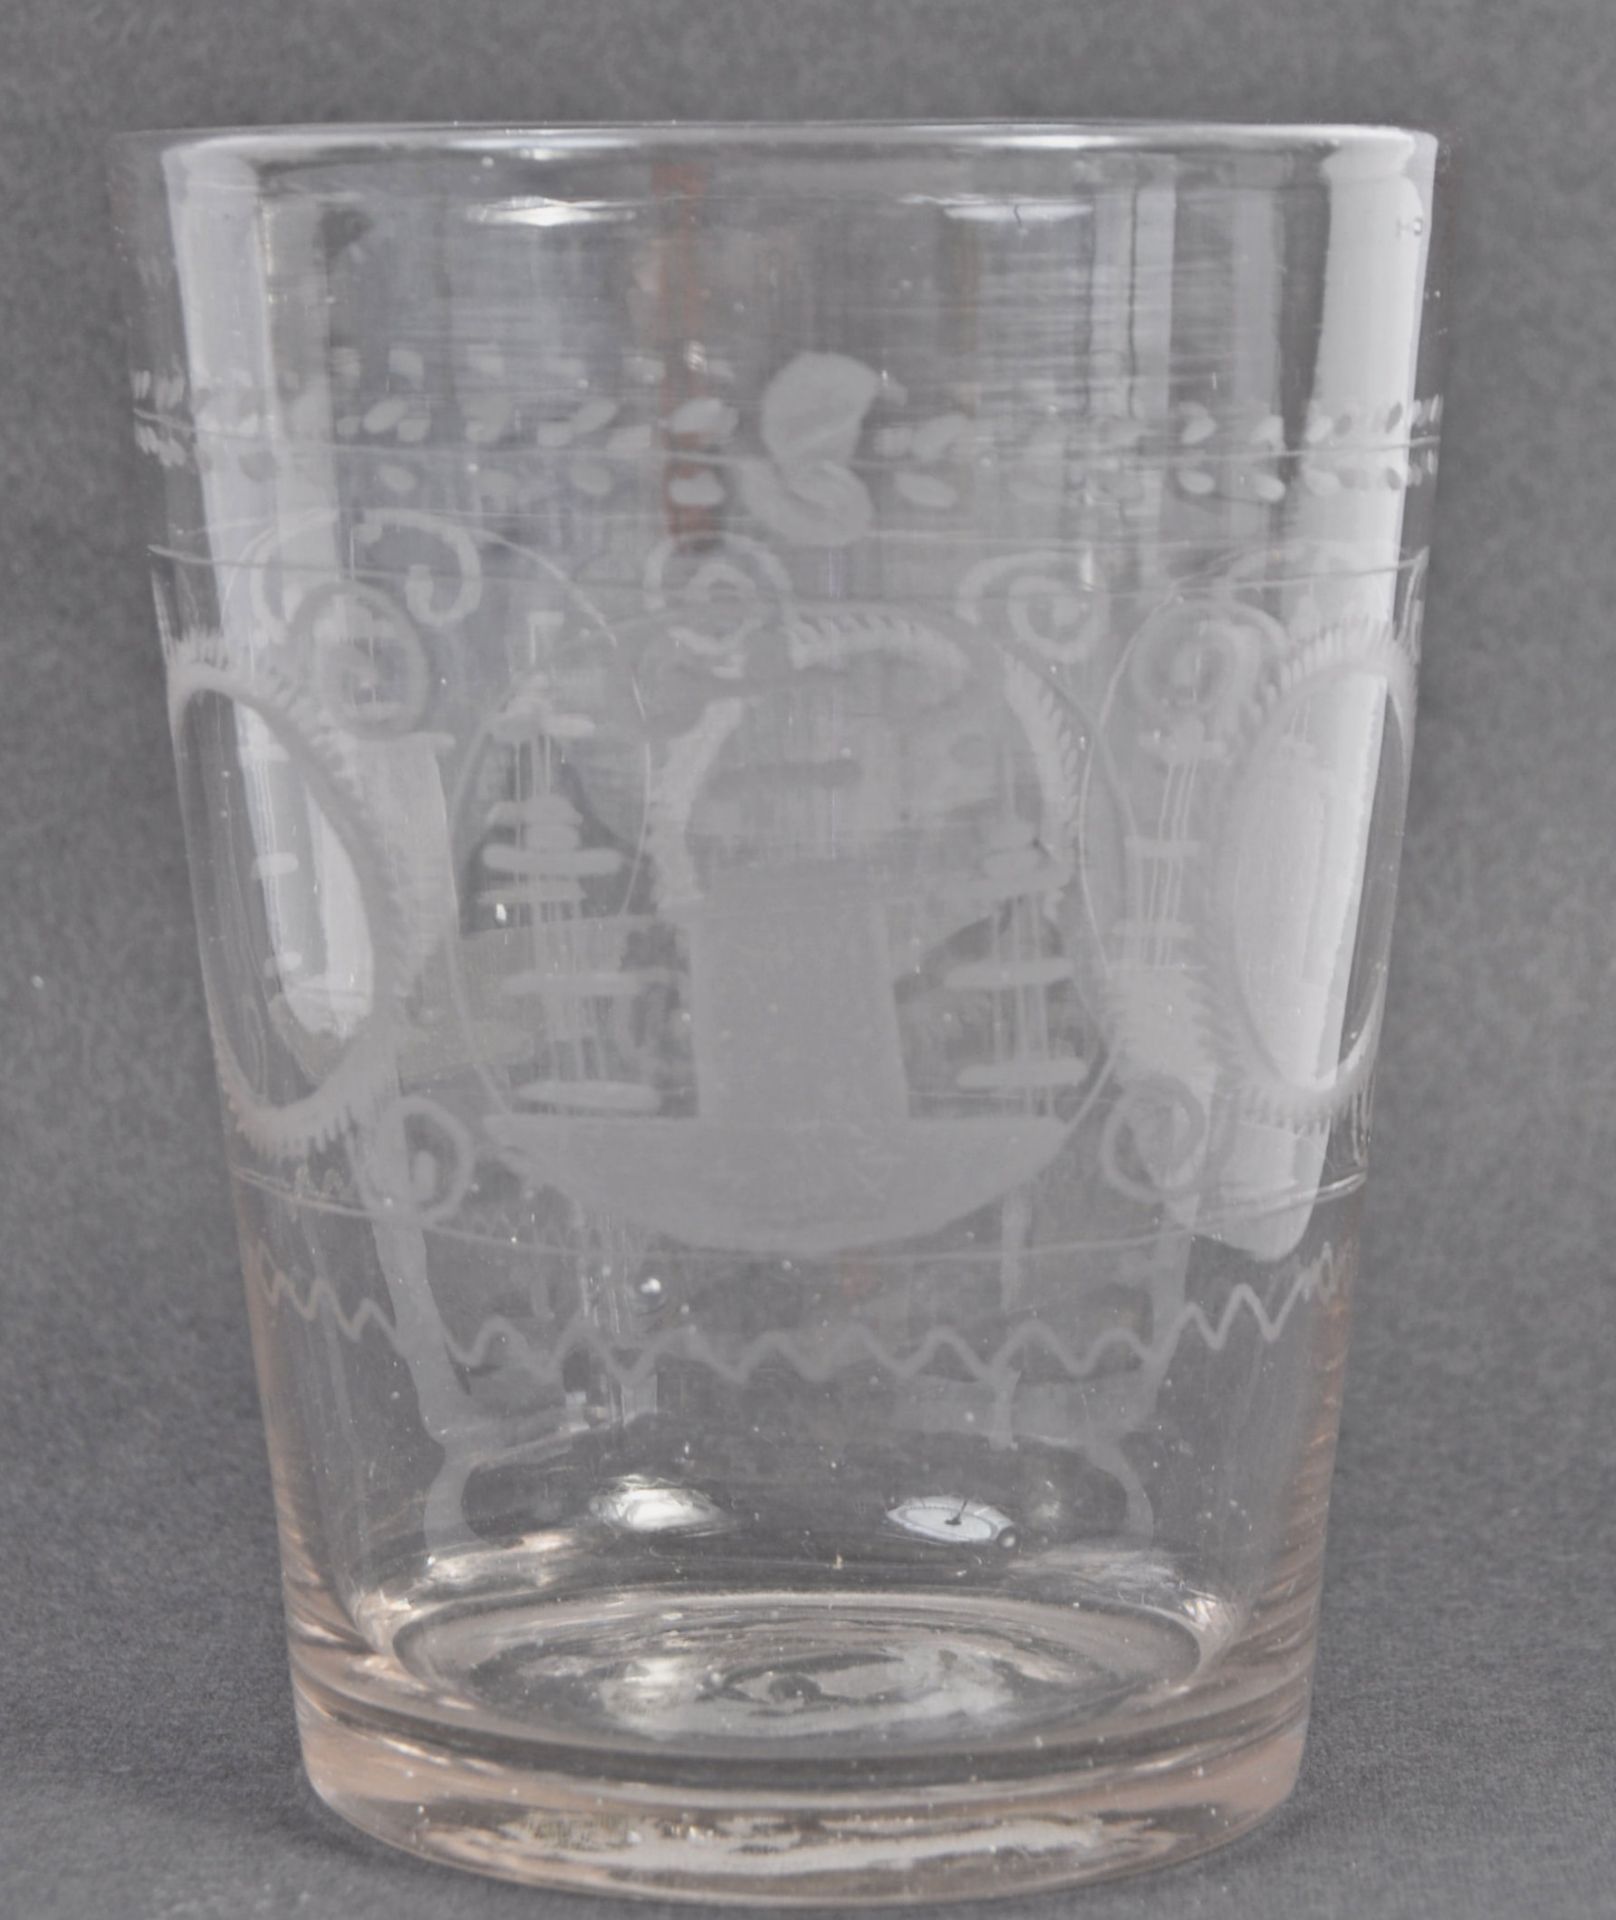 19TH CENTURY GLASS TUMBLER WITH SAILING BOAT DECORATION